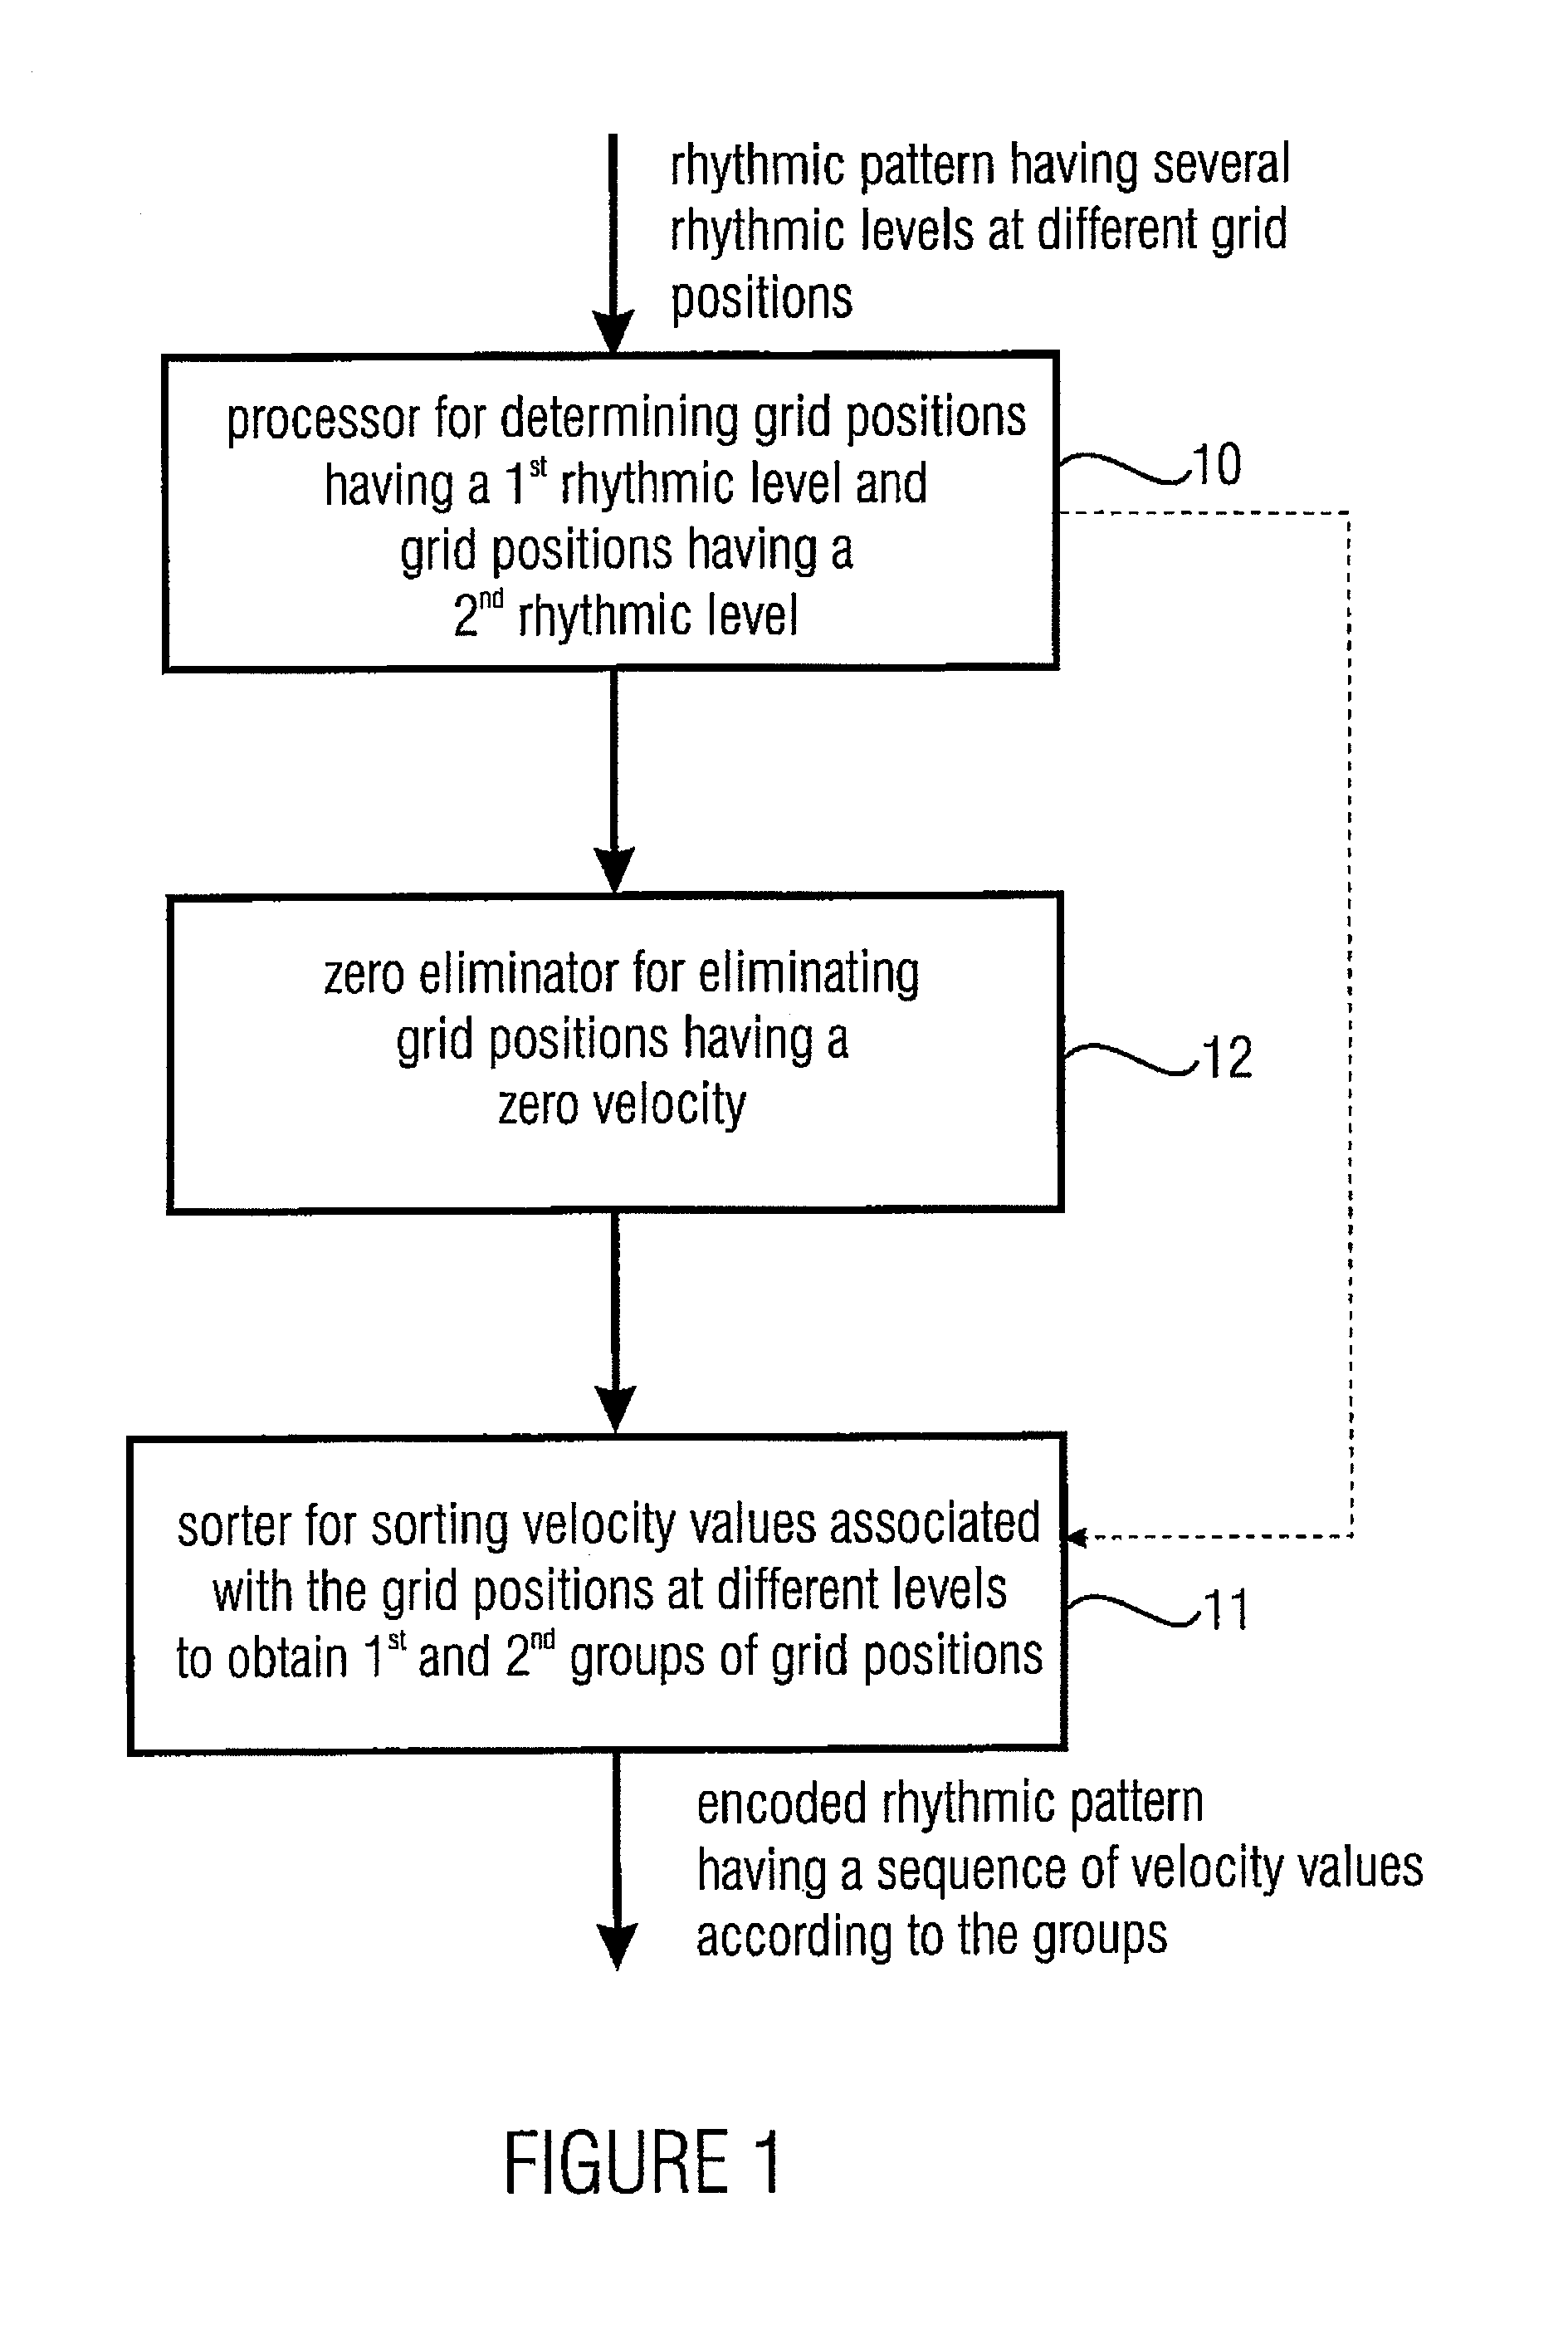 Apparatus and method for generating an encoded rhythmic pattern